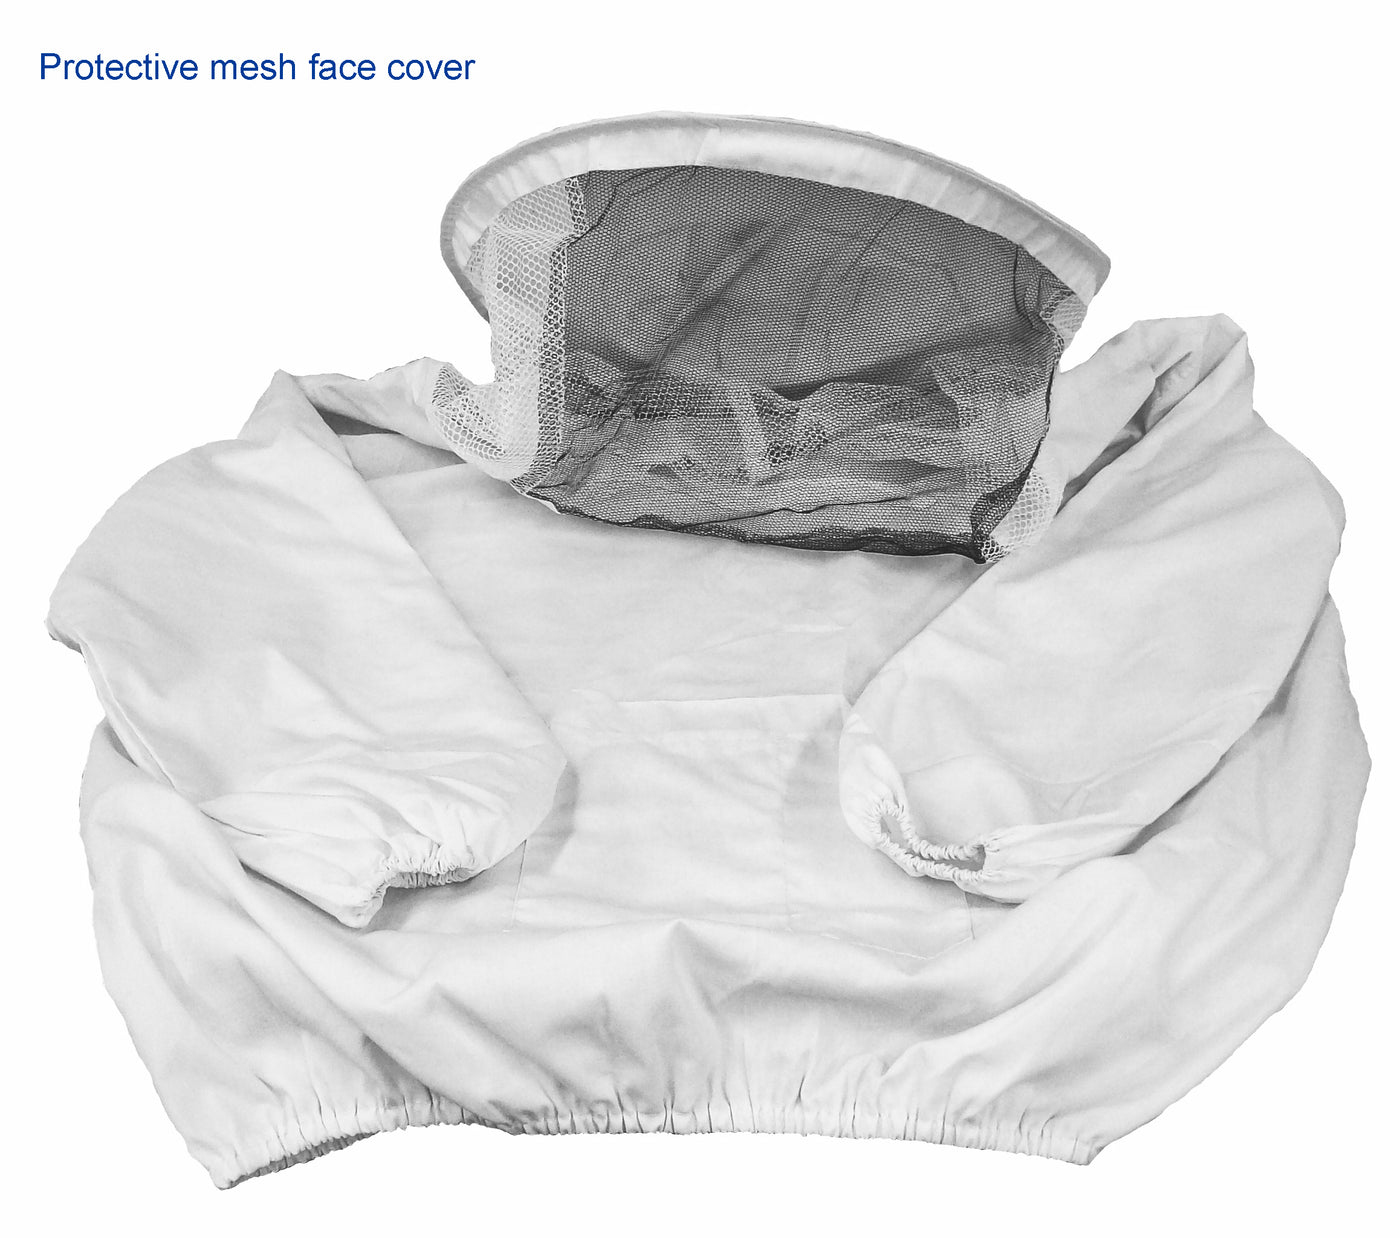 Youth Beekeeping Jacket with Protective Mesh Face Cover